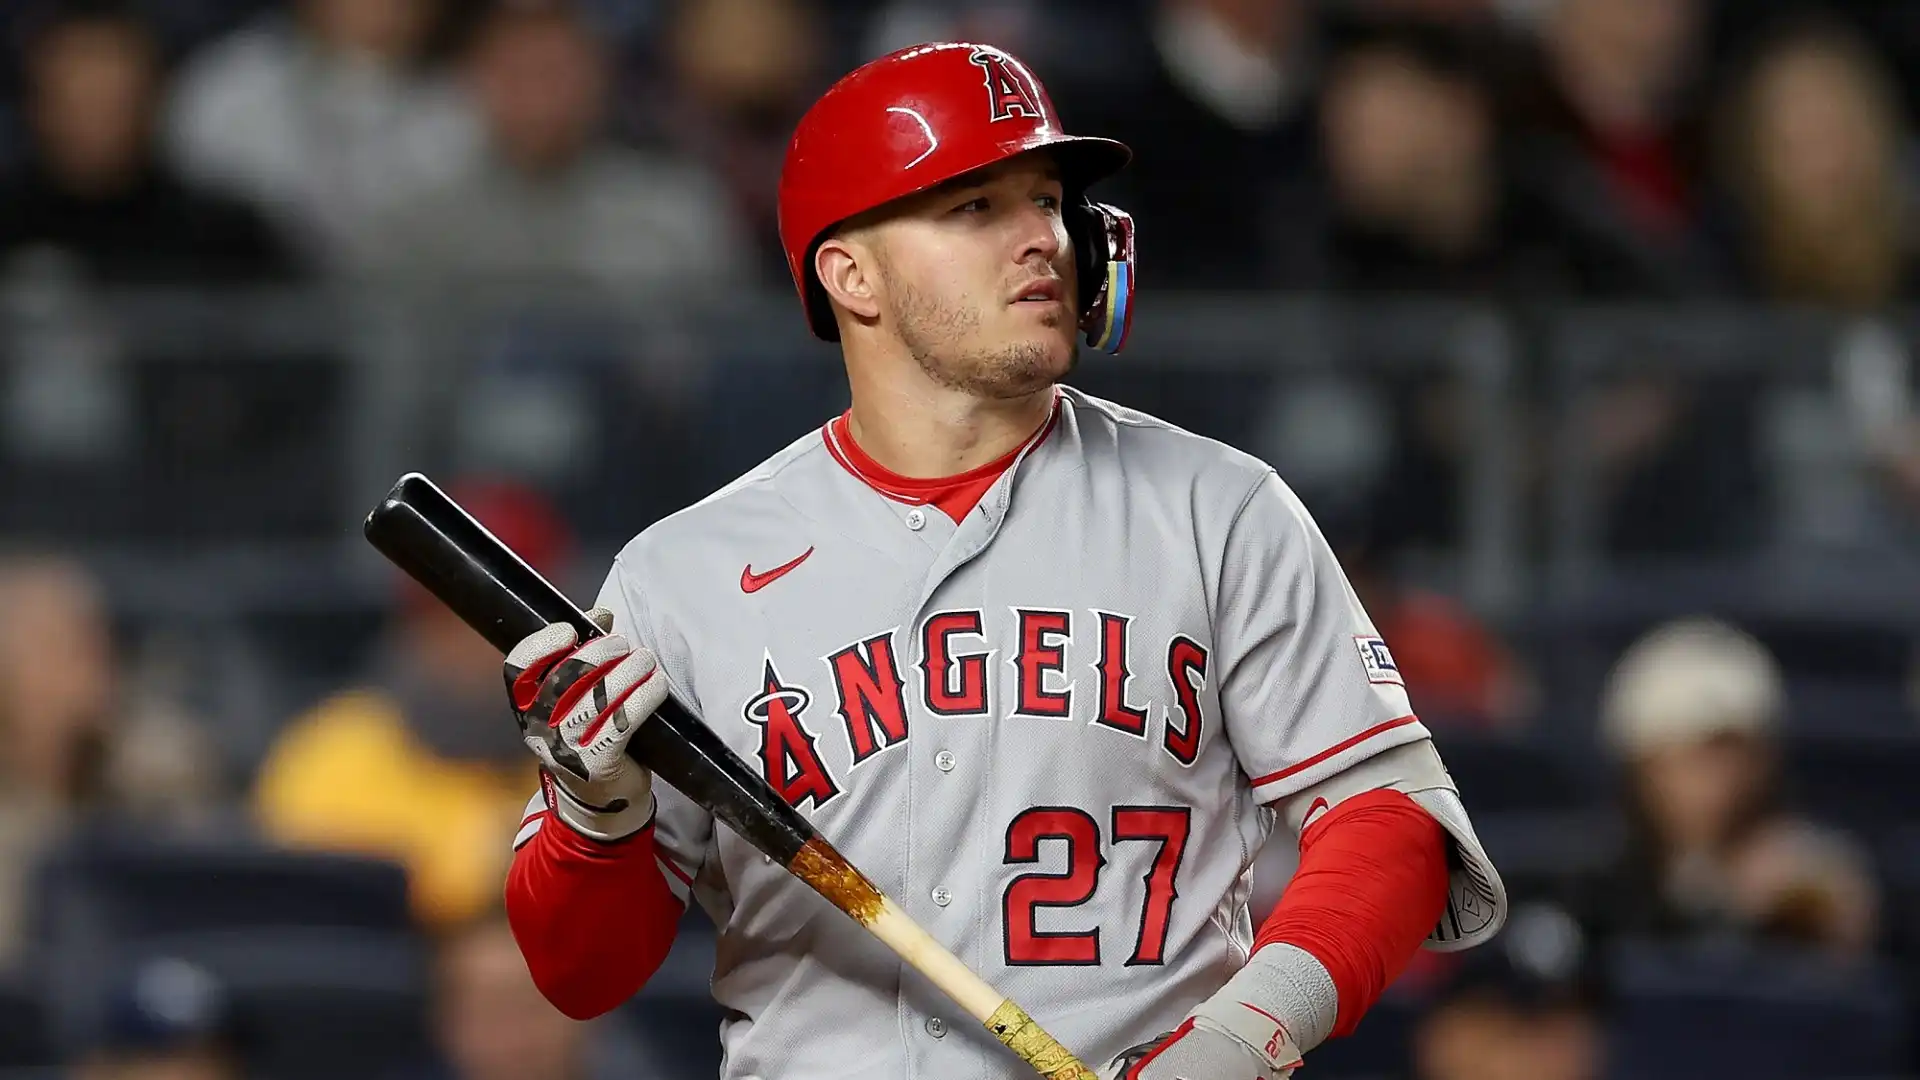 2 Mike Trout (Los Angeles Angels): 2.2 milioni di followers